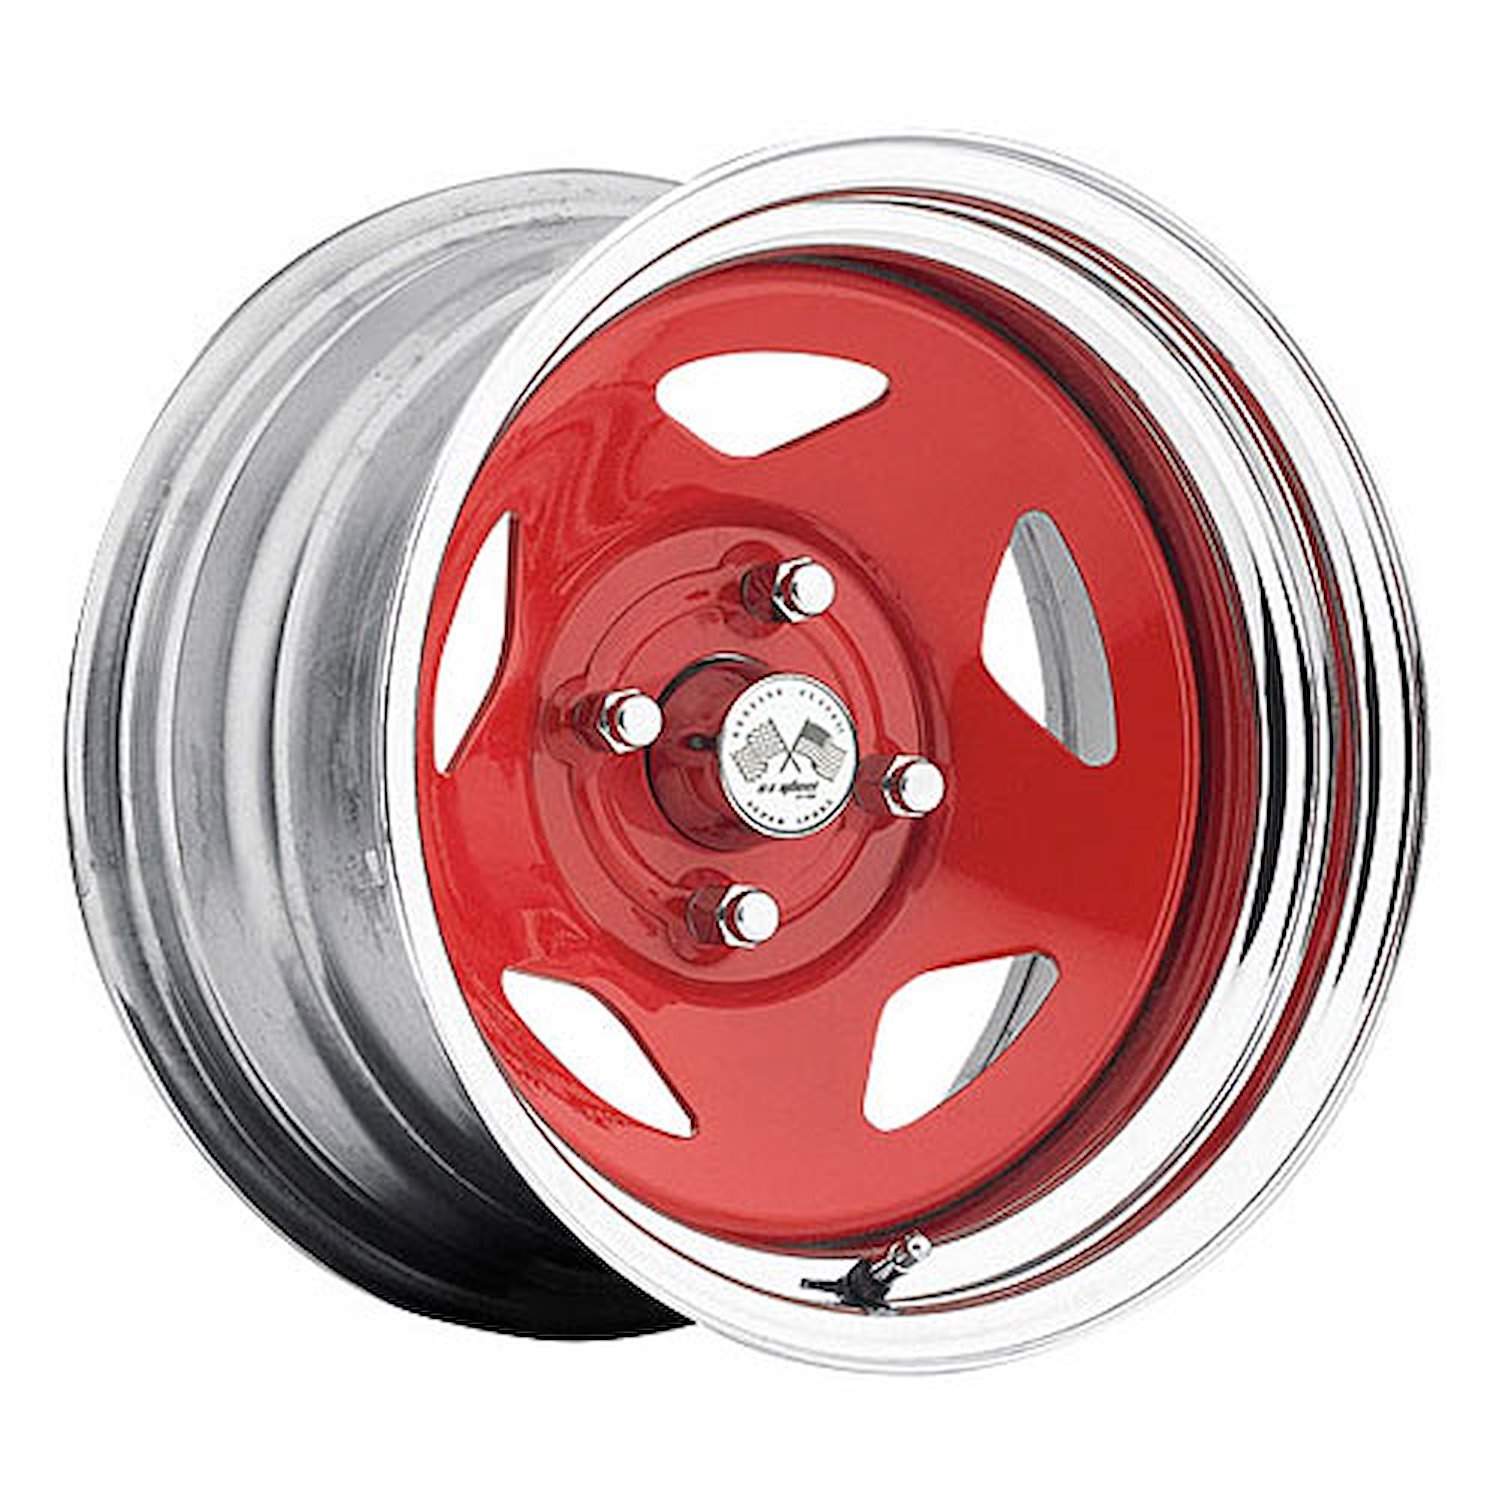 CHROME STAR FWD DRIFTER RED 15 x 8 4 x 100 Bolt Circle 45 Back Spacing 0 offset 266 Center Bore 1400 lbs Load Rating